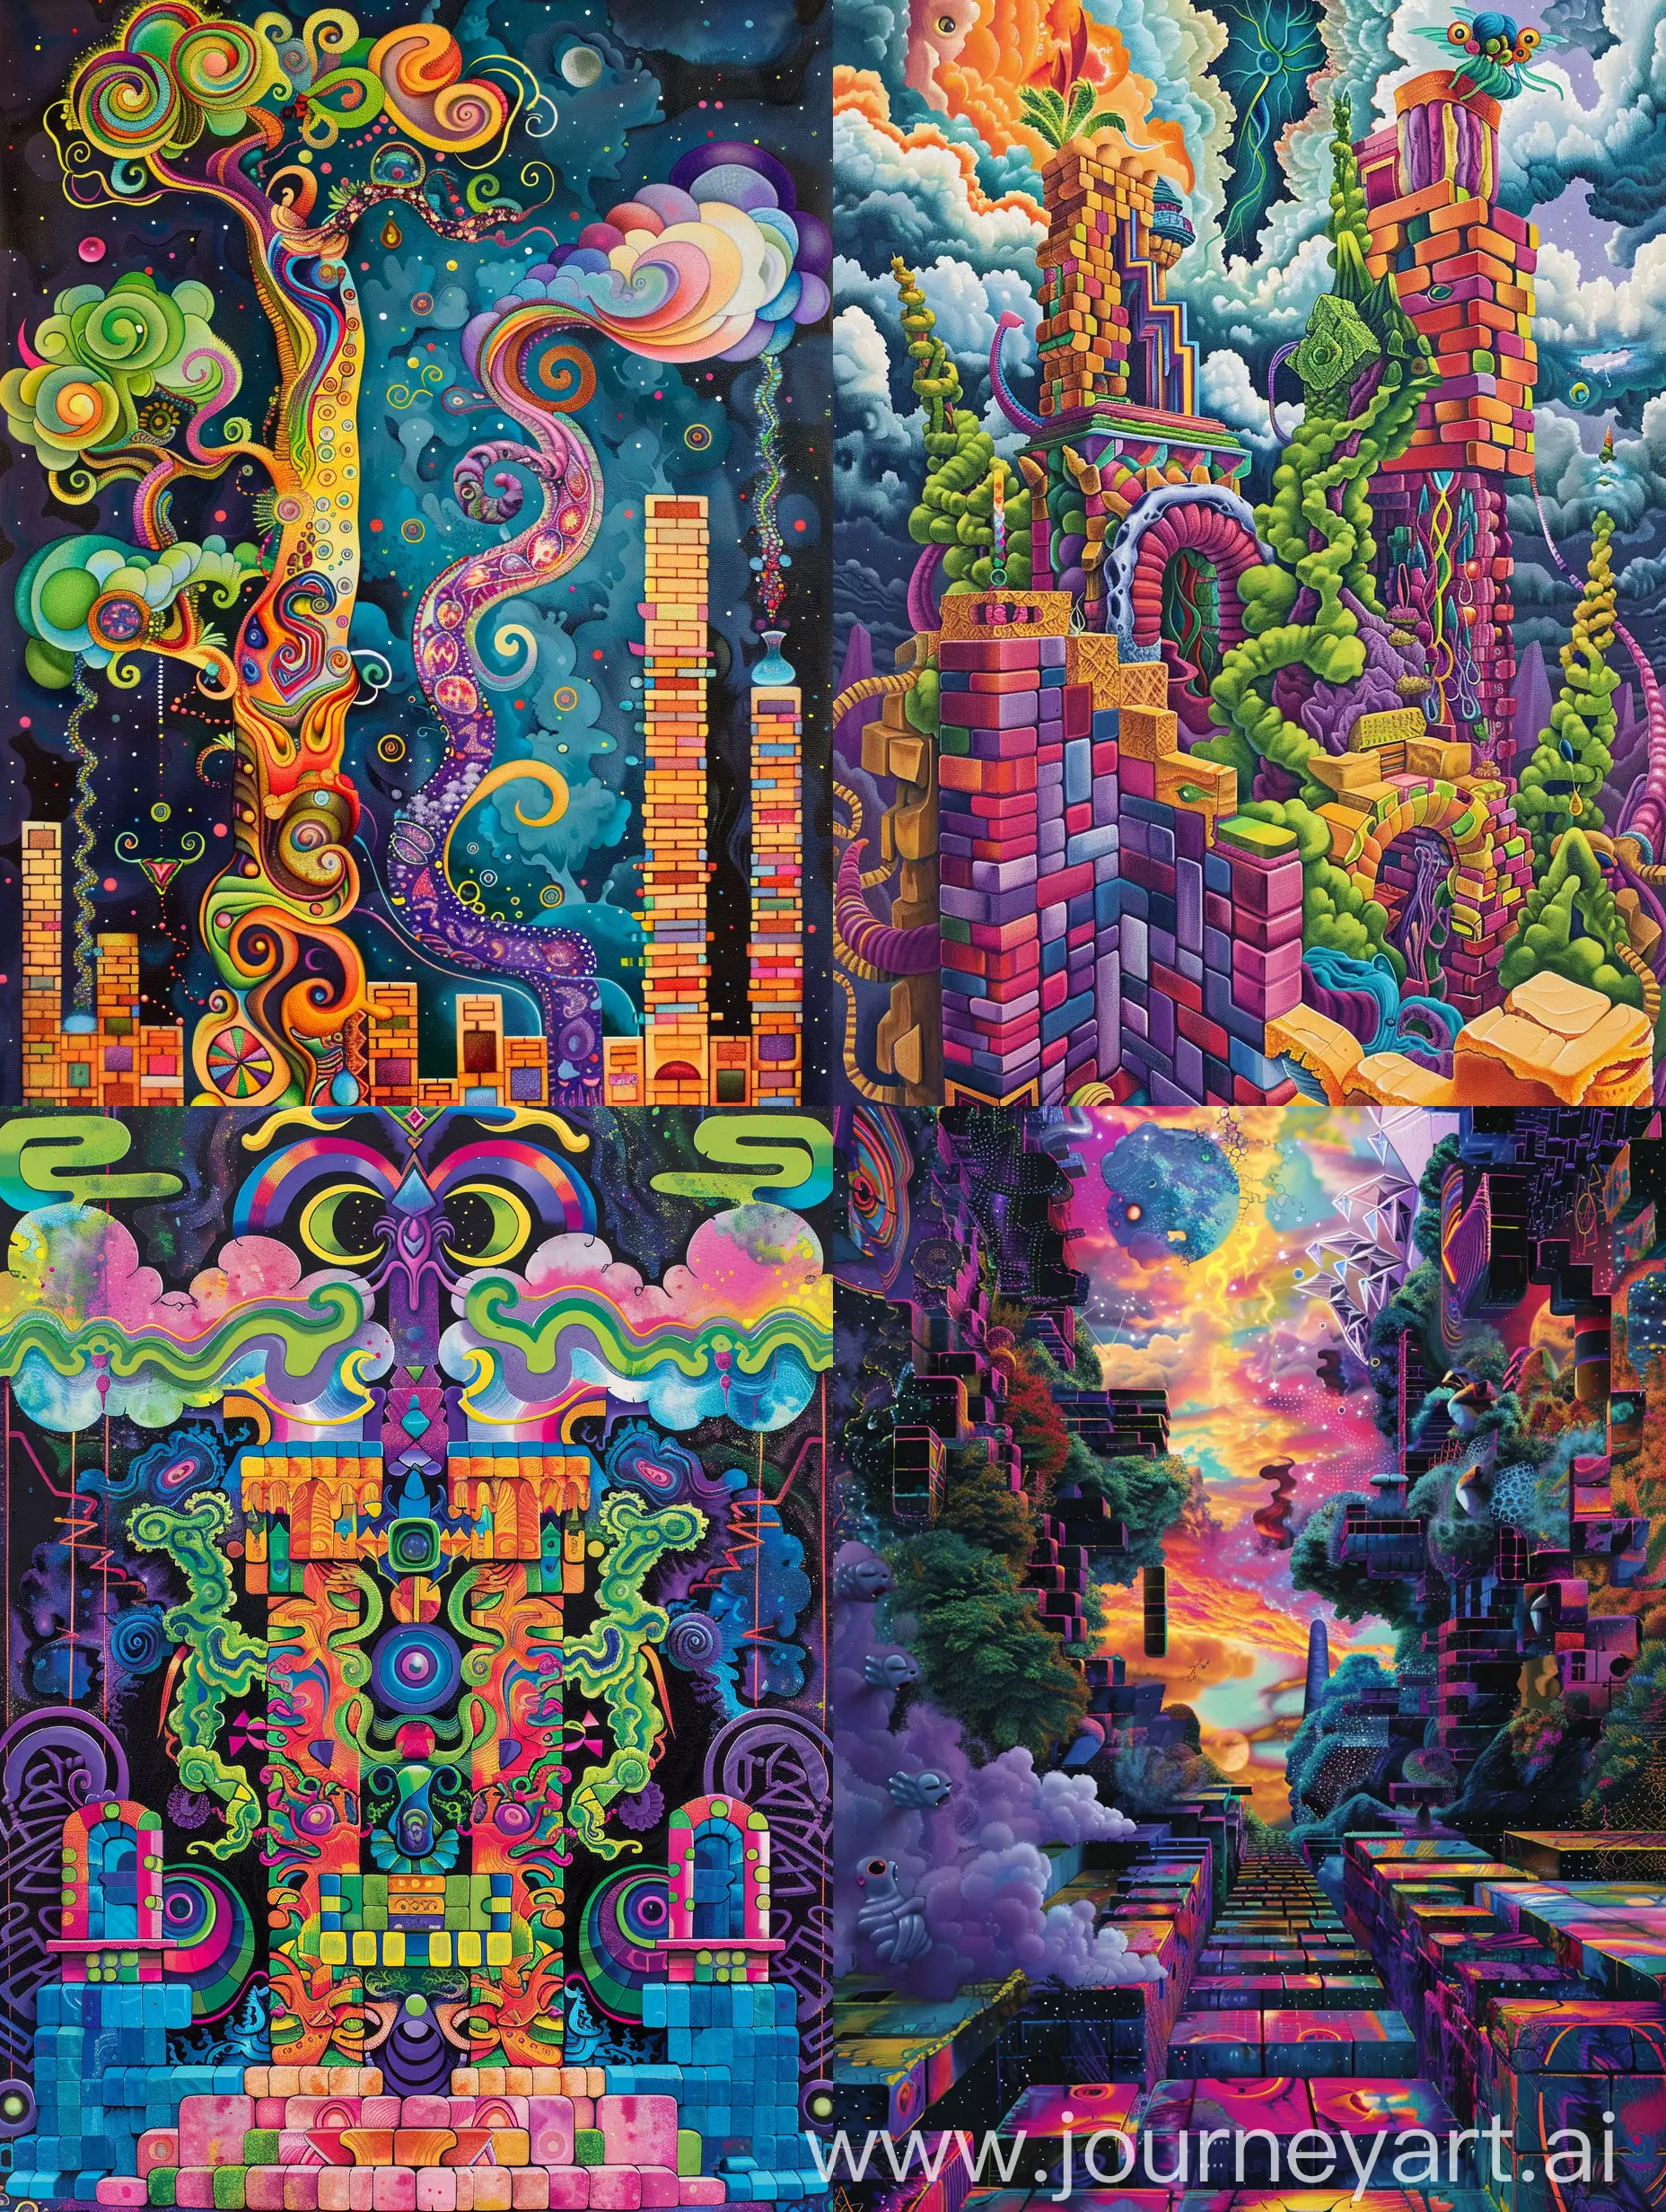 Psychedelic dmt abstract visionary with cloud creatures tress both side geometry shapes abstract bricks with vibrant abstract colors 